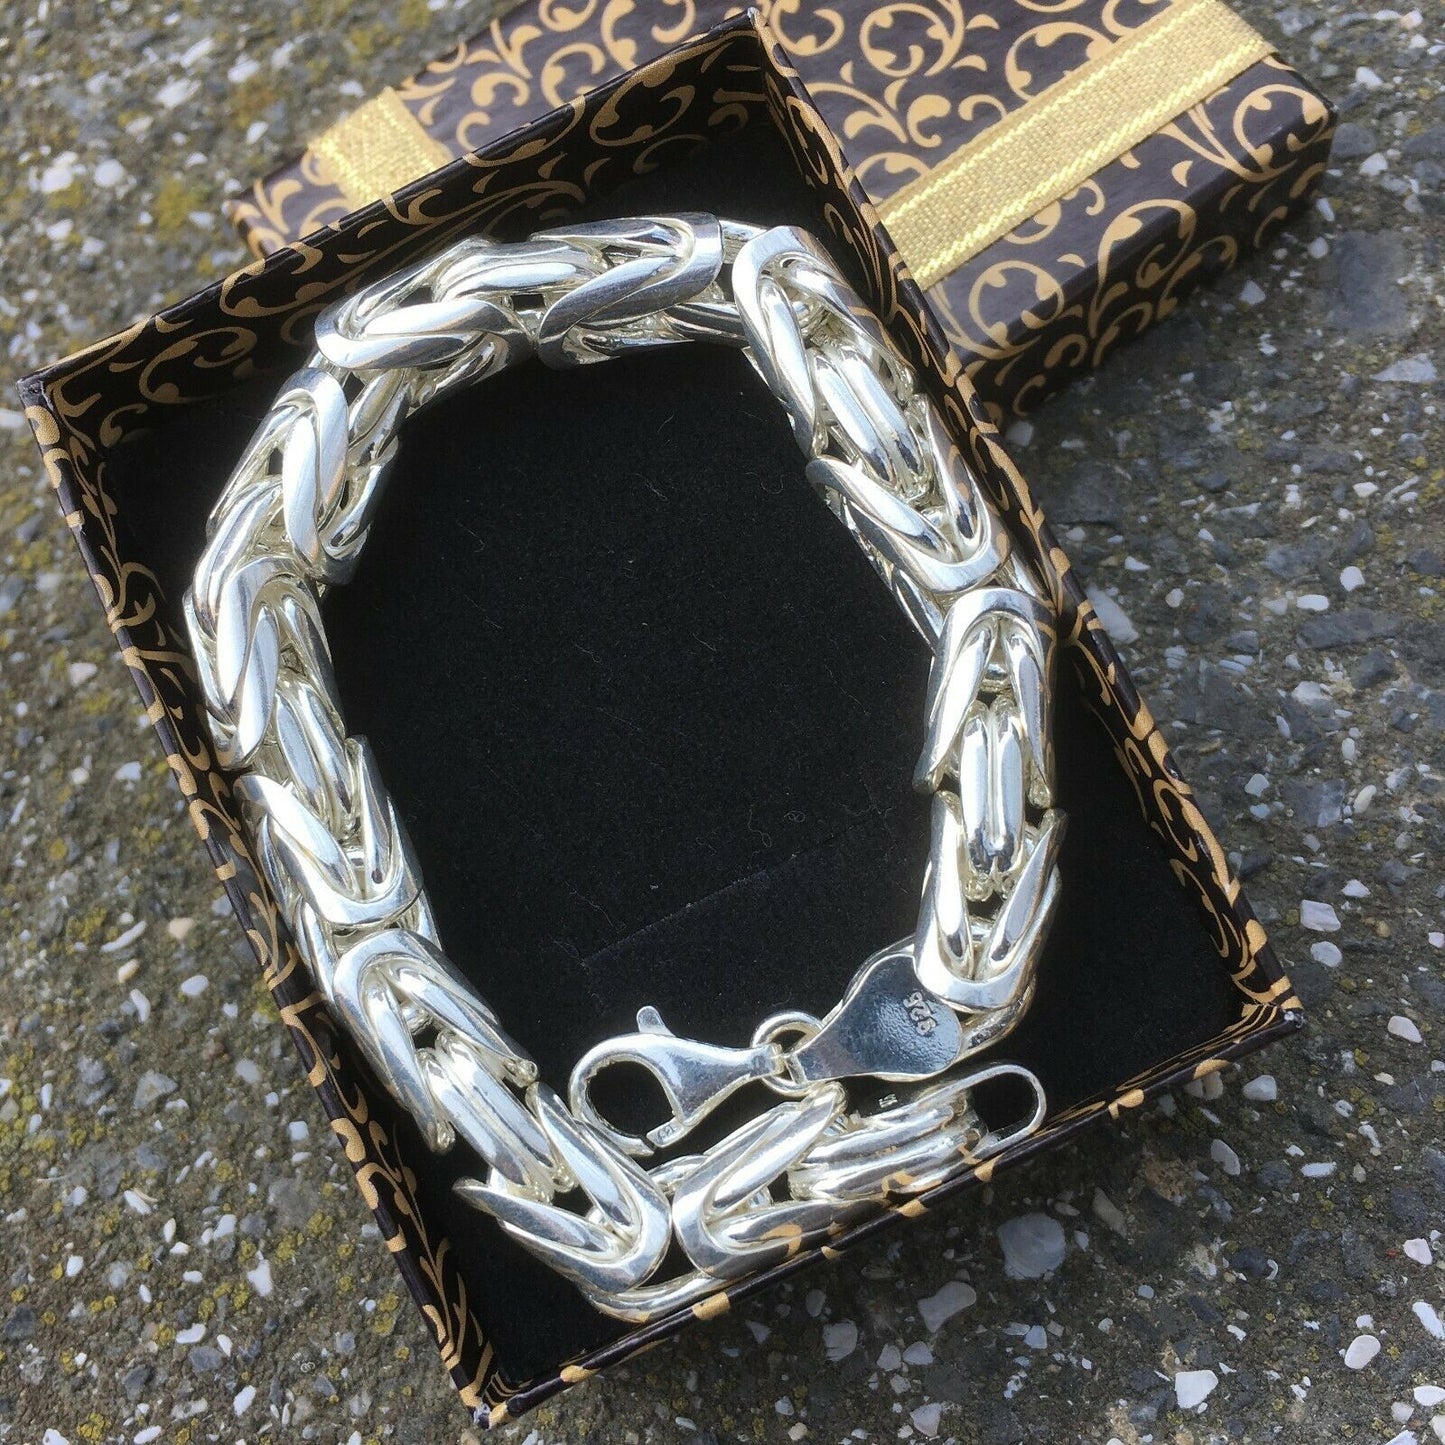 Solid Silver Bracelet Byzantine King's Chain 10 mm thick heavy Mens Jewelry 925 Sterling